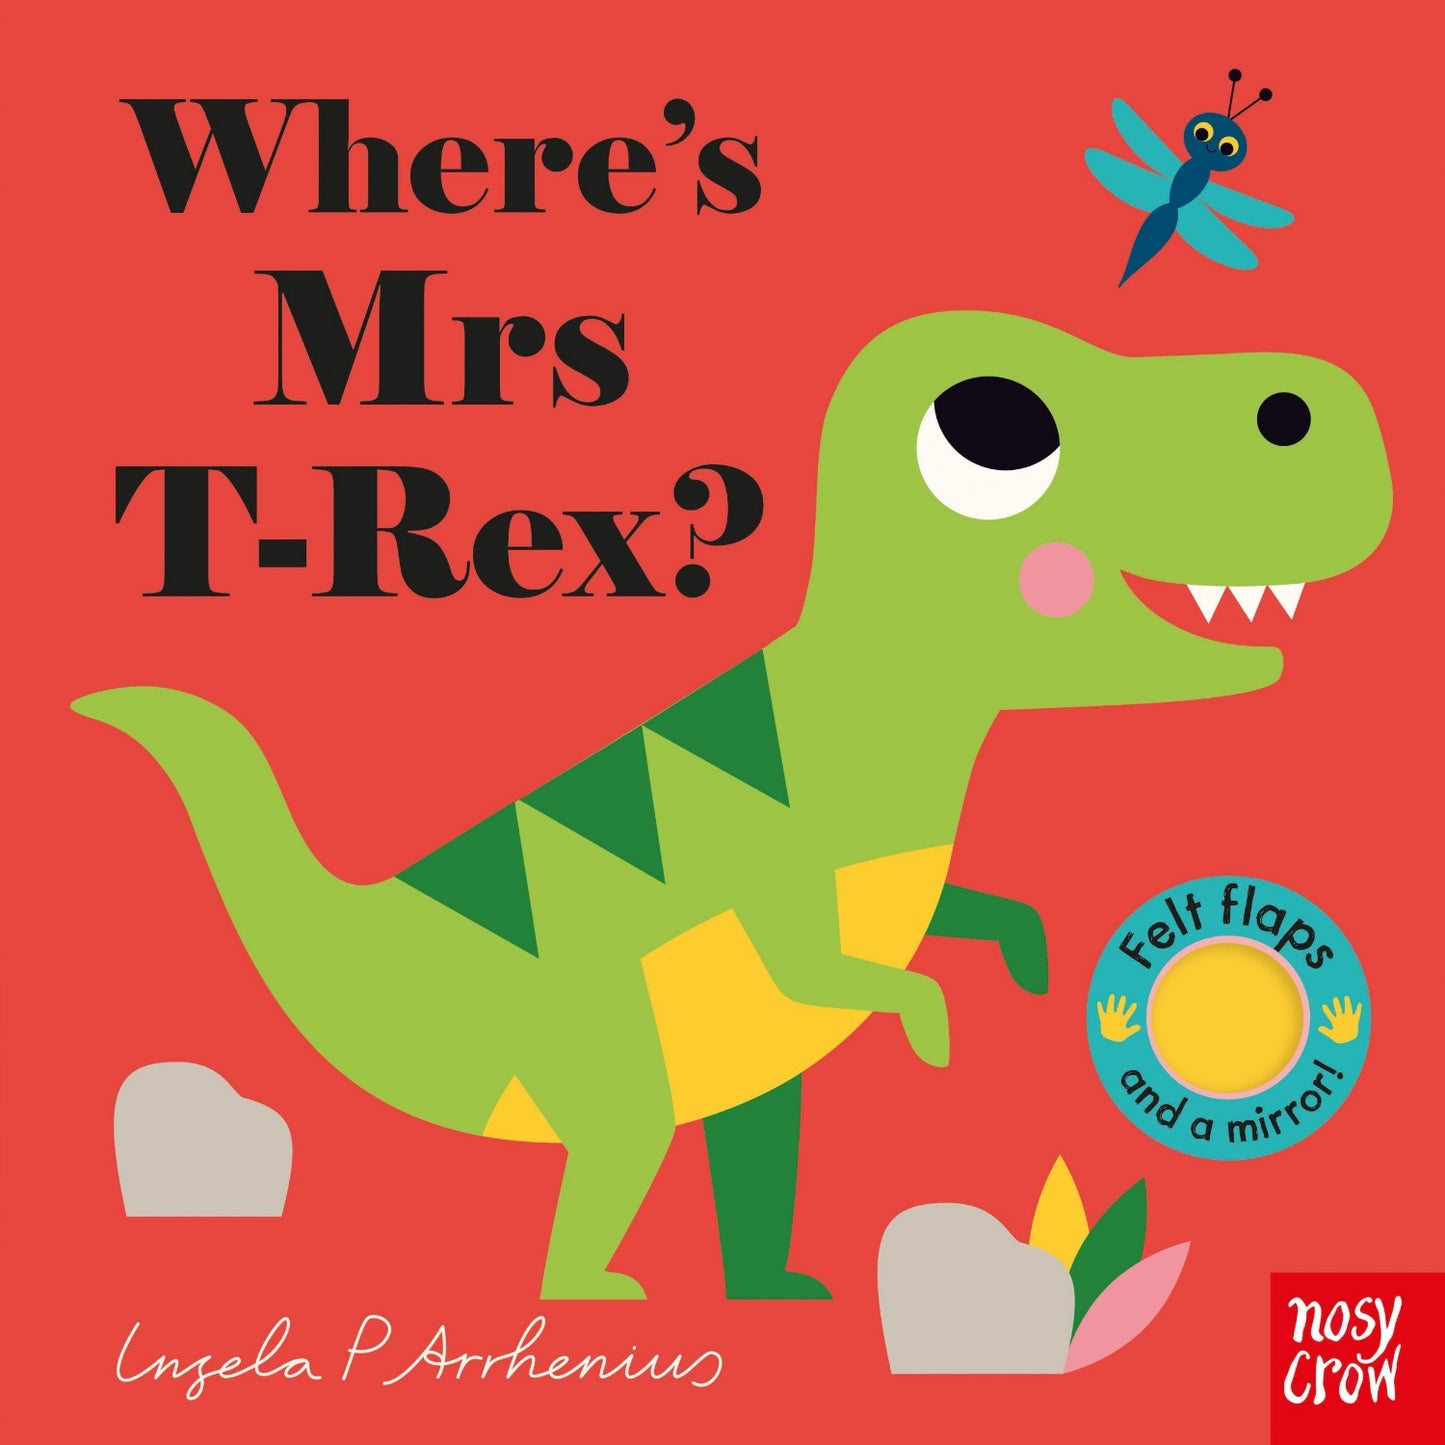 Where's Mrs T-Rex? | Felt Flaps Board Book for Babies & Toddlers